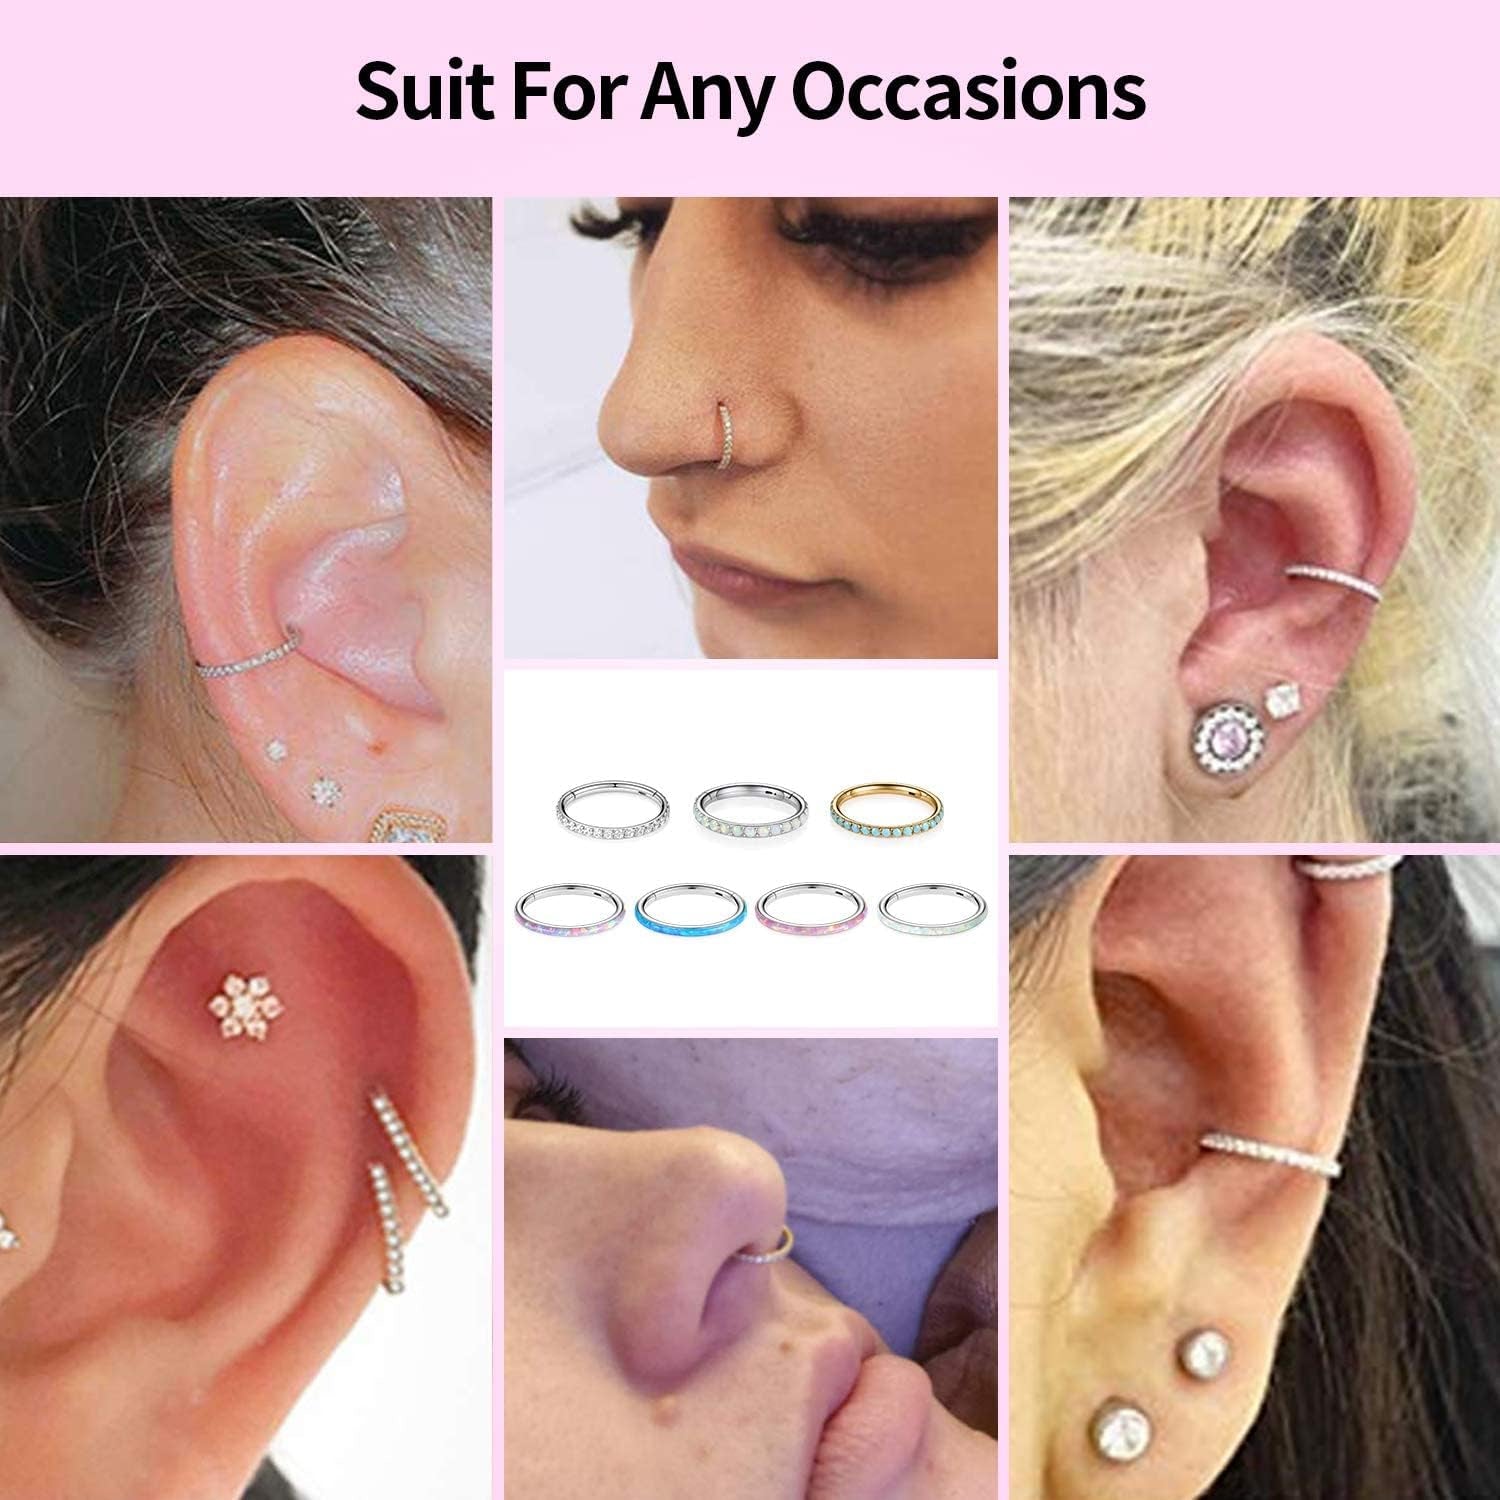 20G 18G 16G Conch Hoop Ring Septum Jewelry Opal CZ Turquoise Seamless Clicker Ring Daith Earrings Surgical Steel Rook Tragus Conch Piercing Jewelry Small Hoop Earring Nose Ring